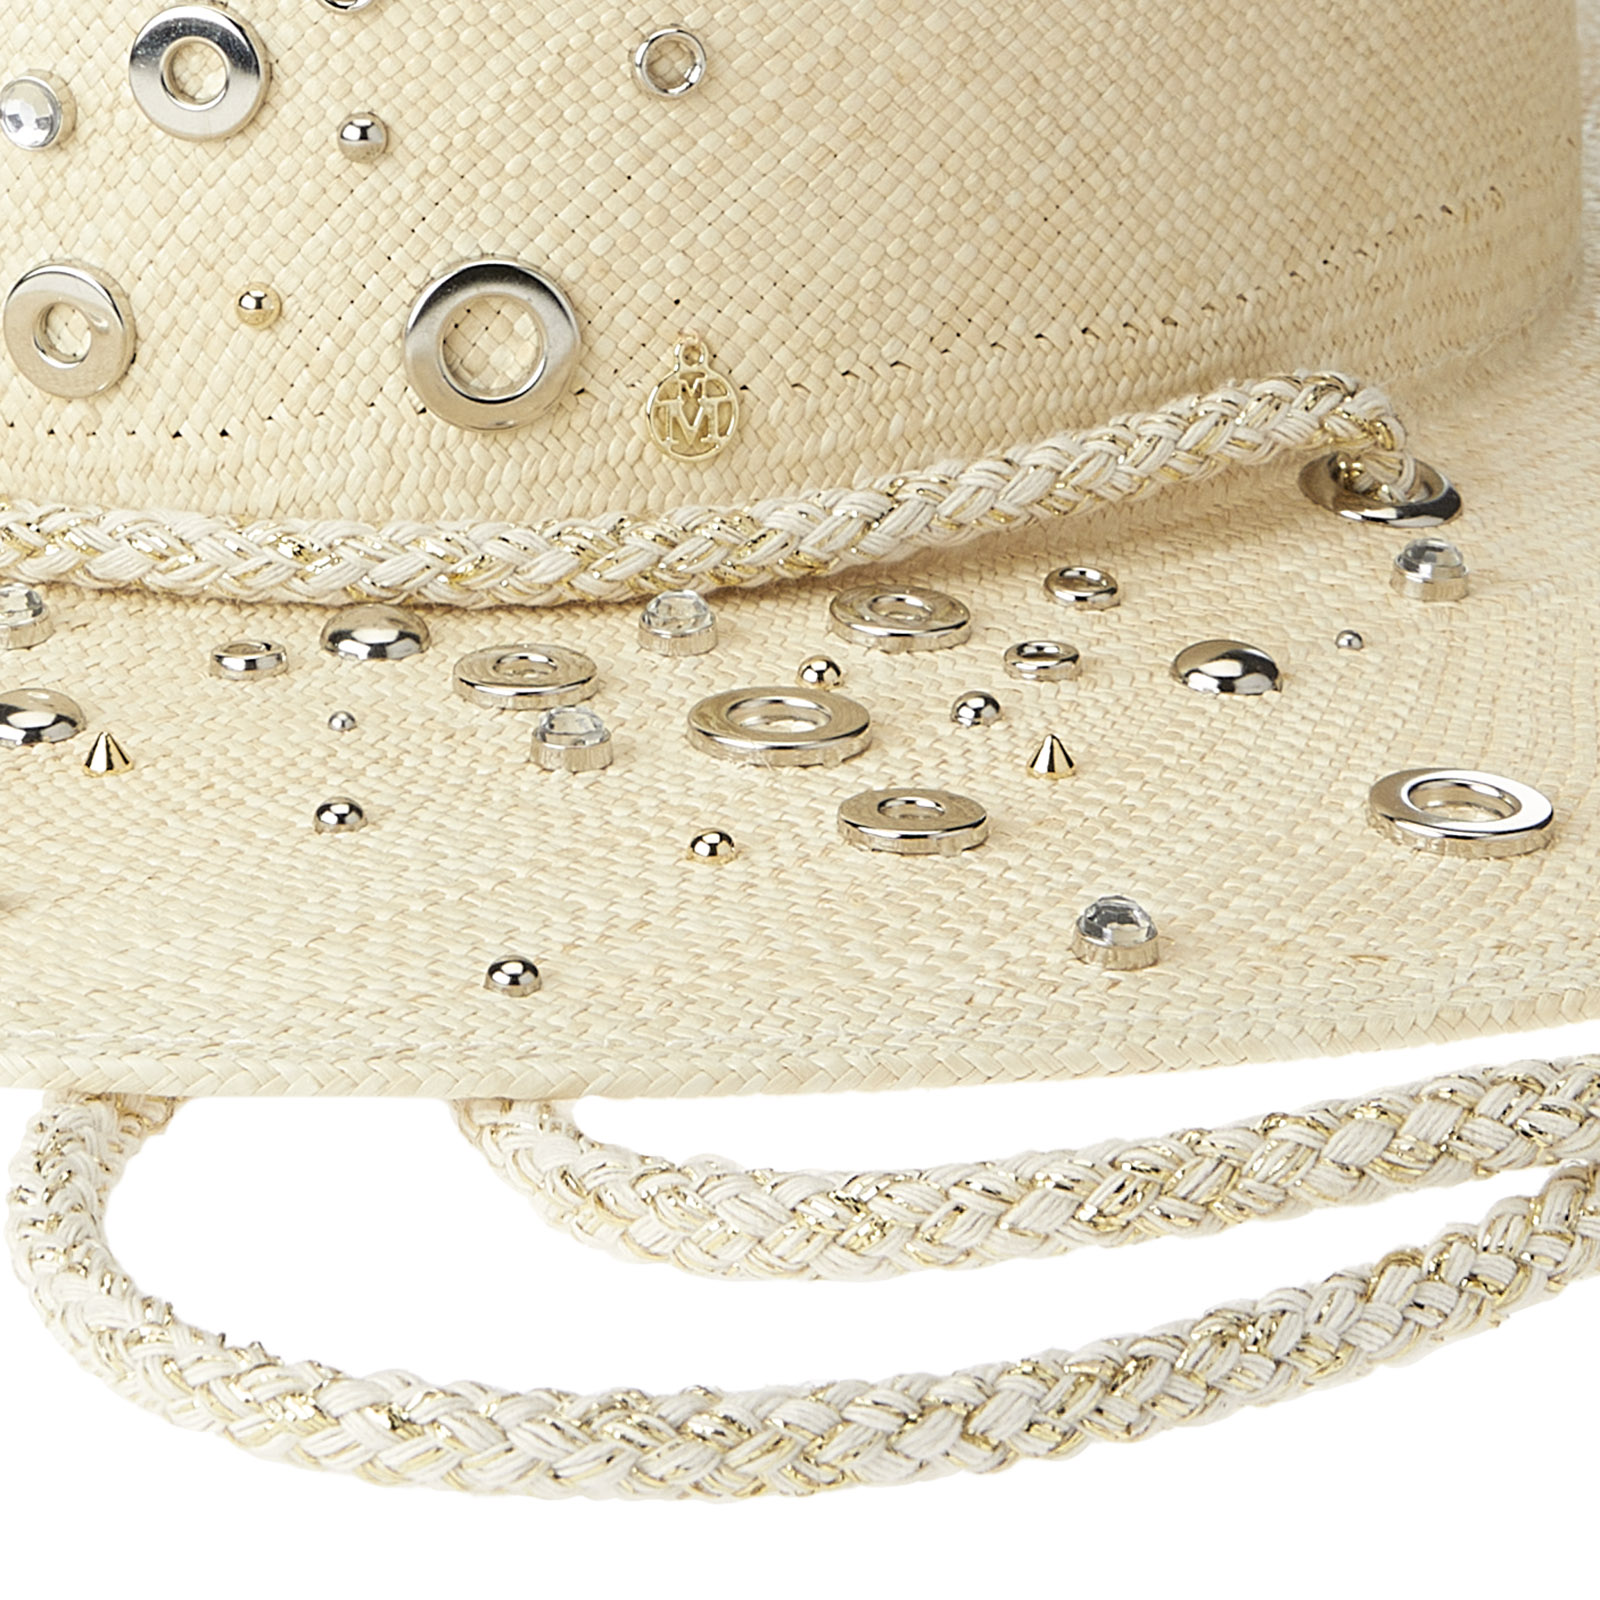 Capeline made of brisa straw embellished with gold and silver starlight strass